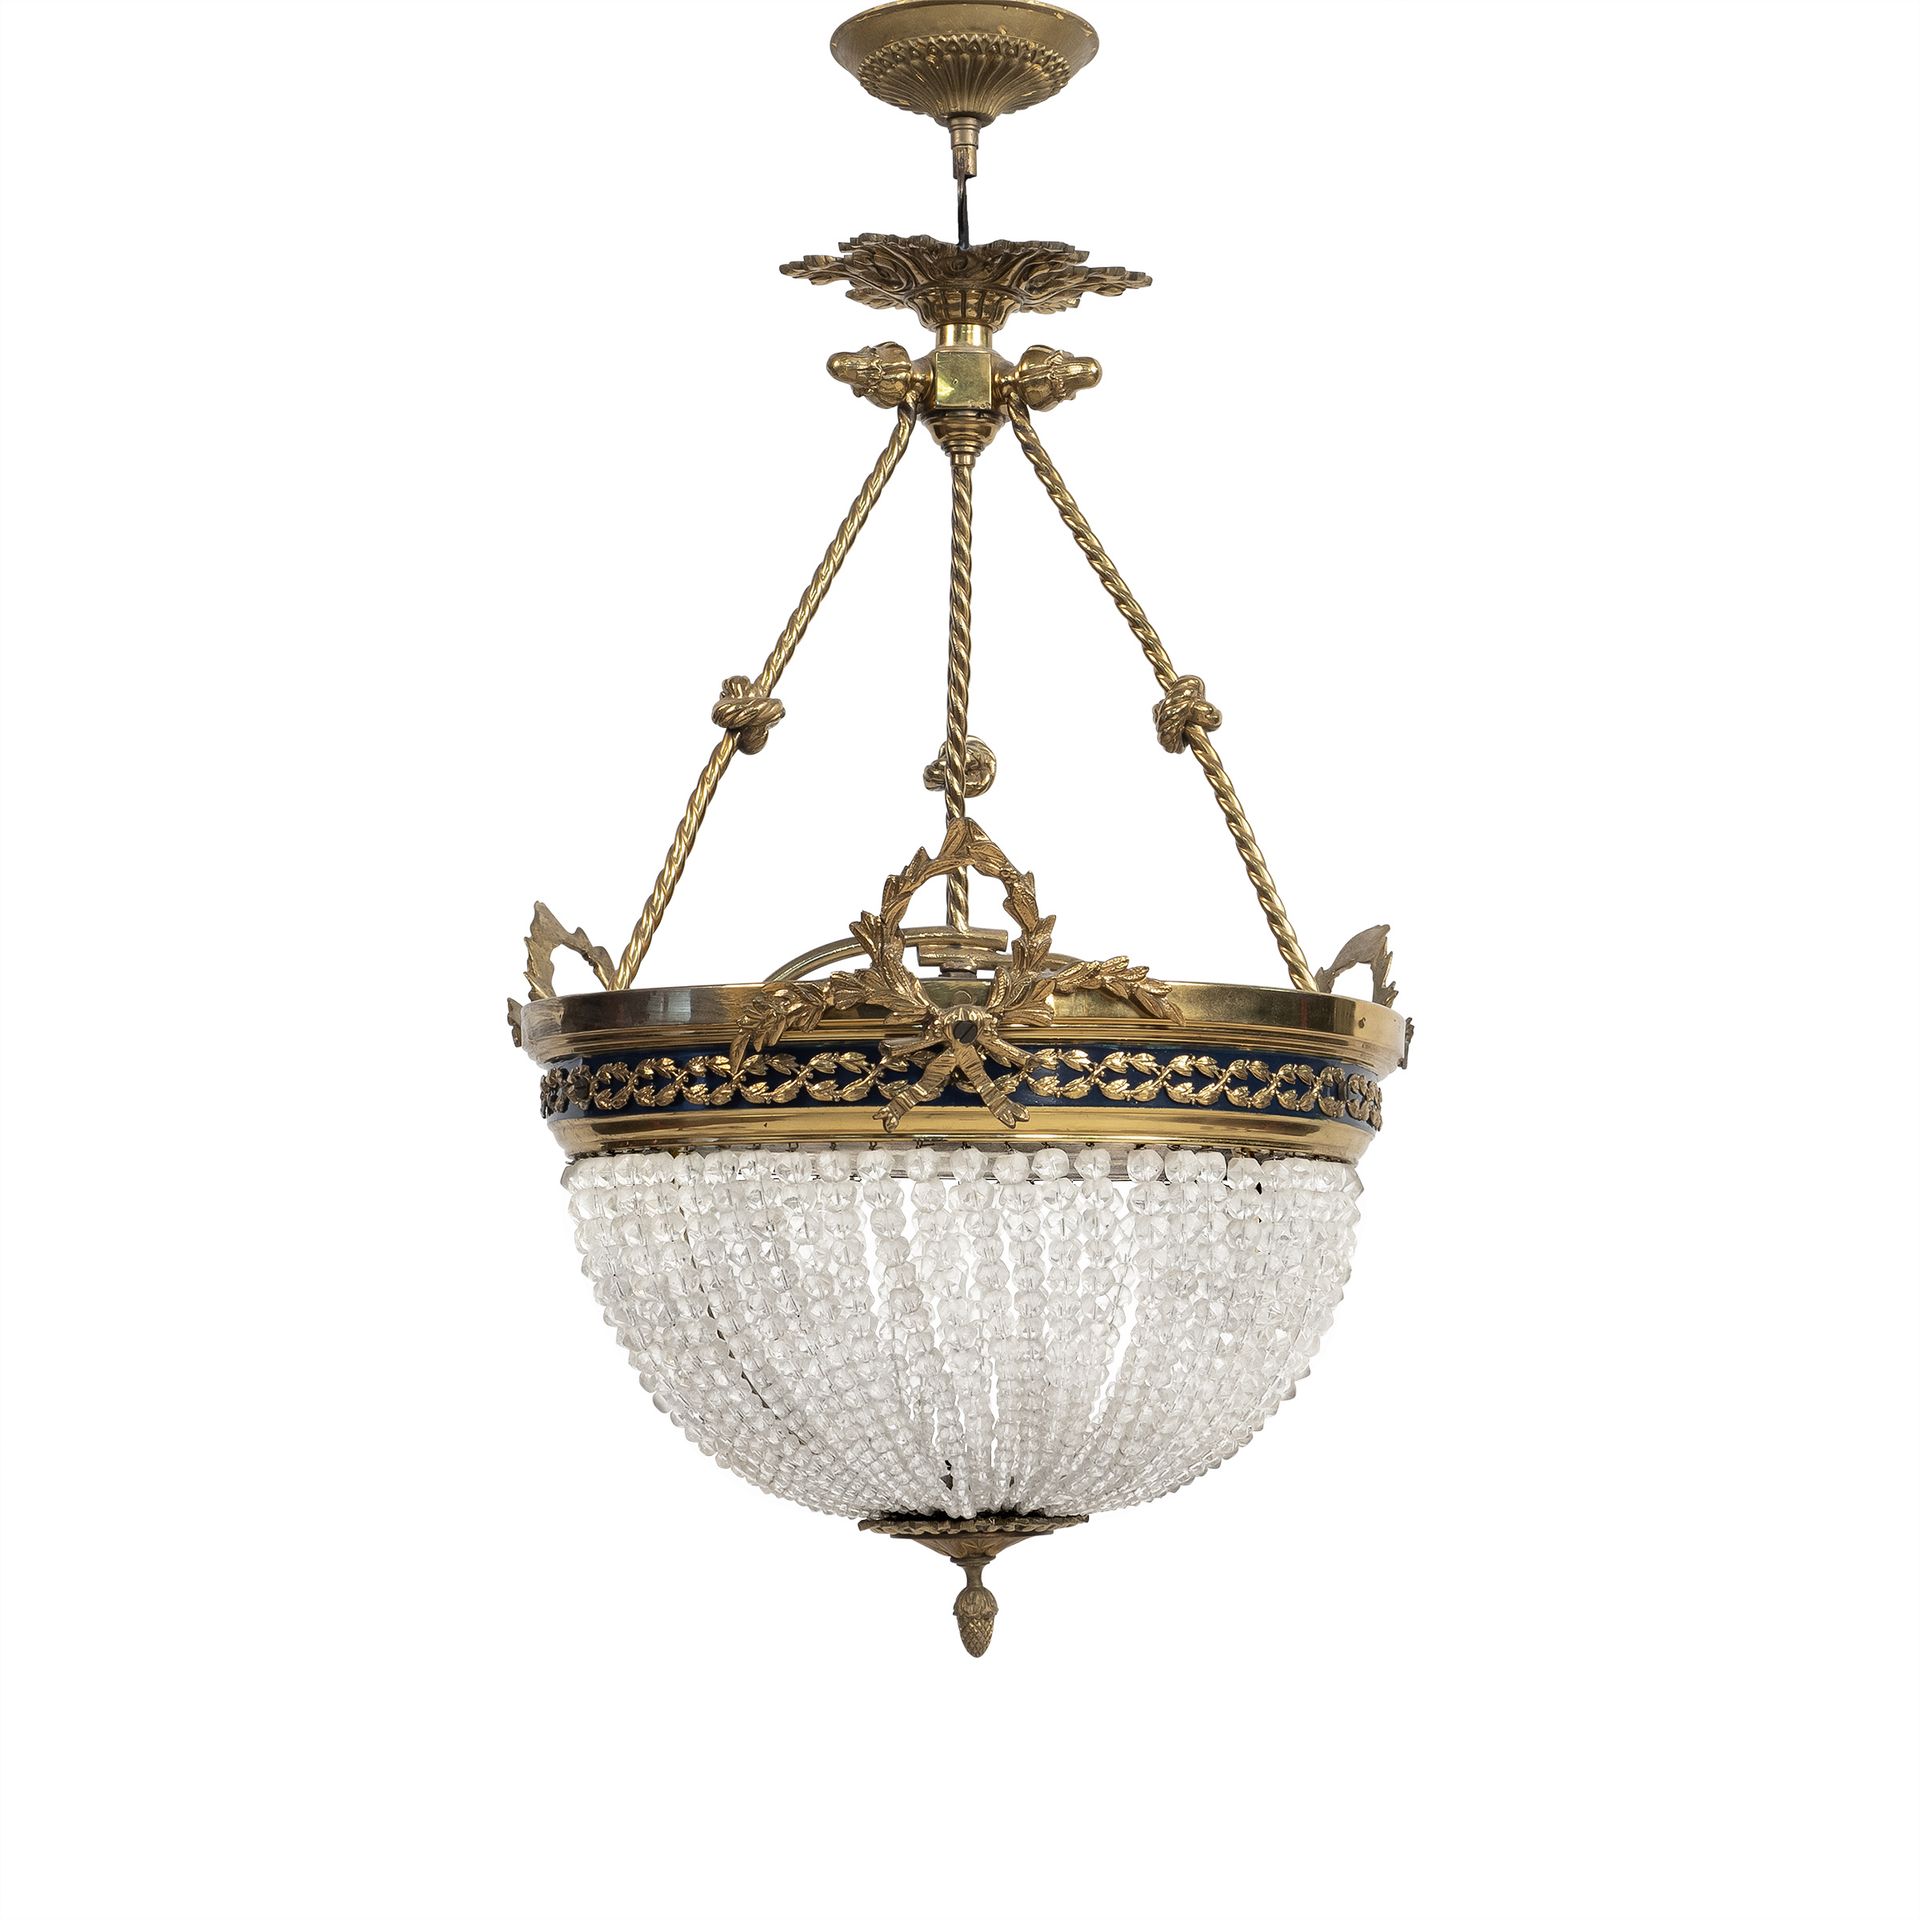 Gilt bronze and glass chandelier France, early 20th century 60x34 cm.